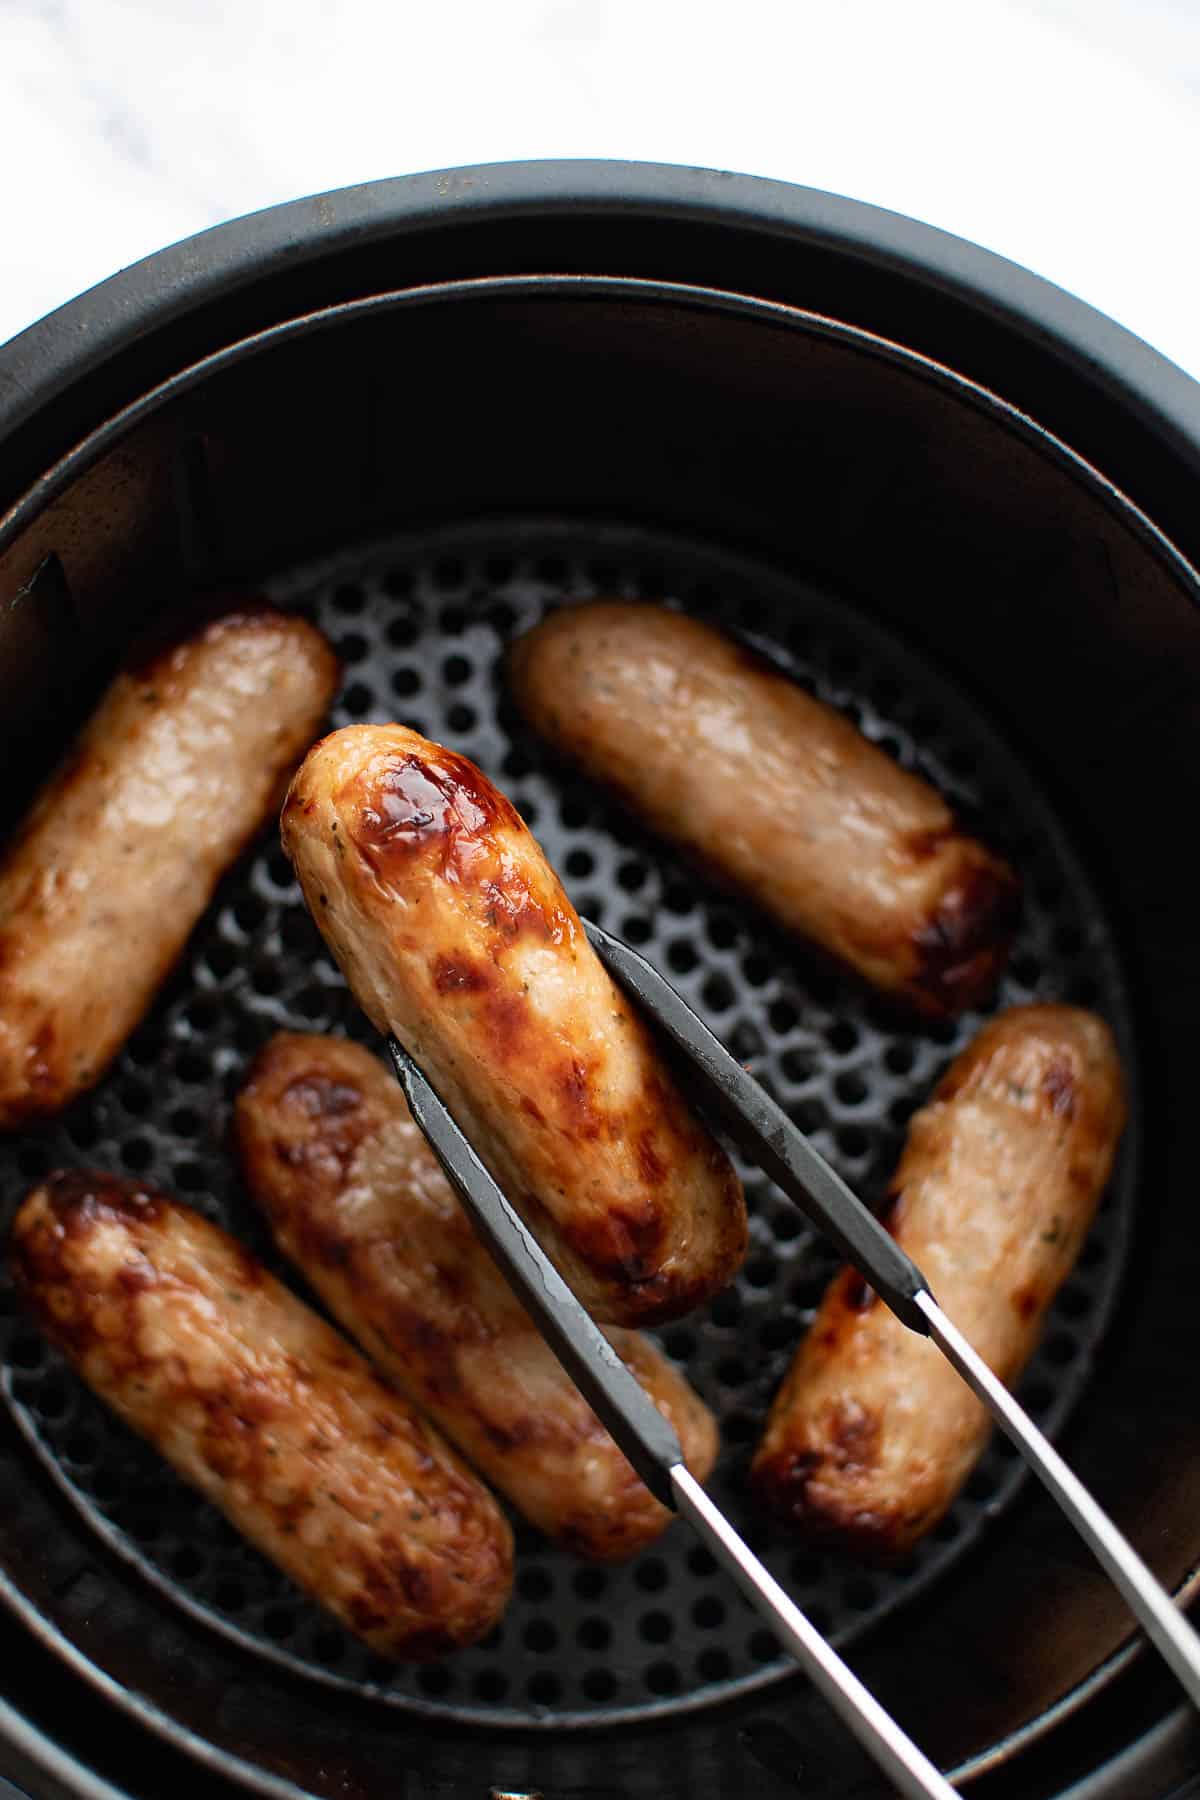 Sausages in an air fryer, with tongs lifting up one of the sausages.